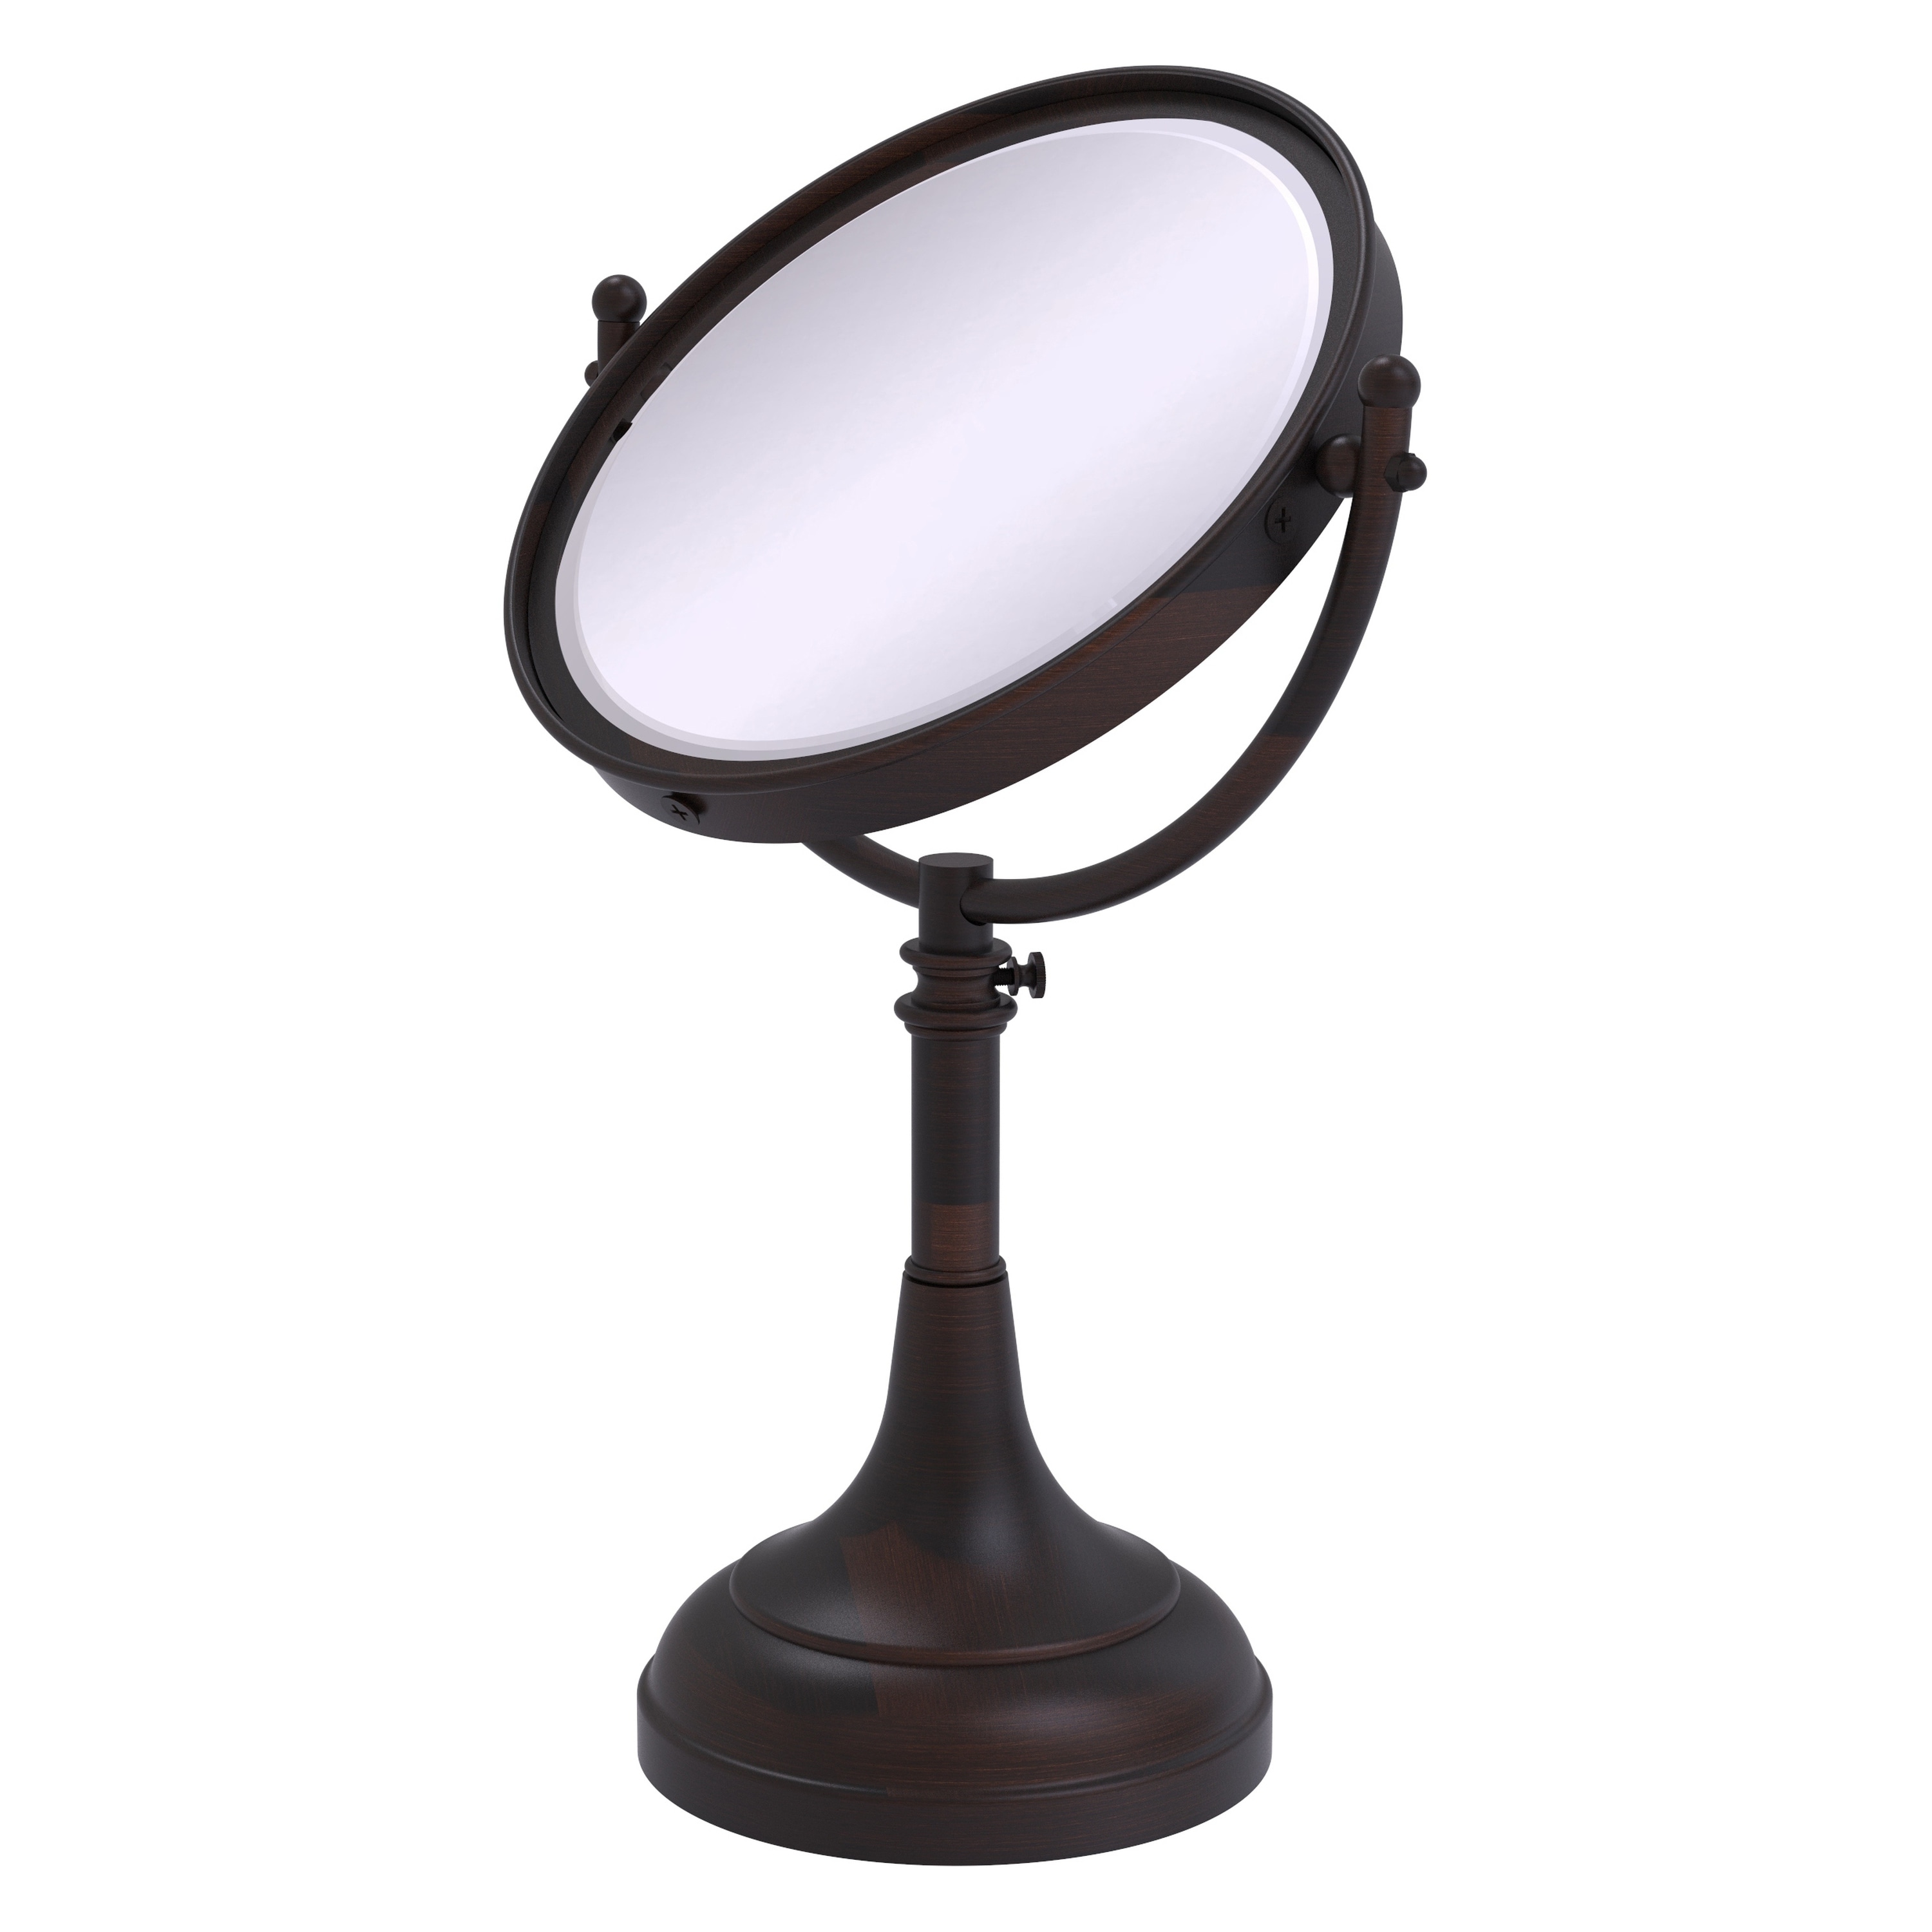 8-in x 23.5-in Distressed White Double-sided 2X Magnifying Countertop Vanity Mirror | - Allied Brass DM-1/2X-VB